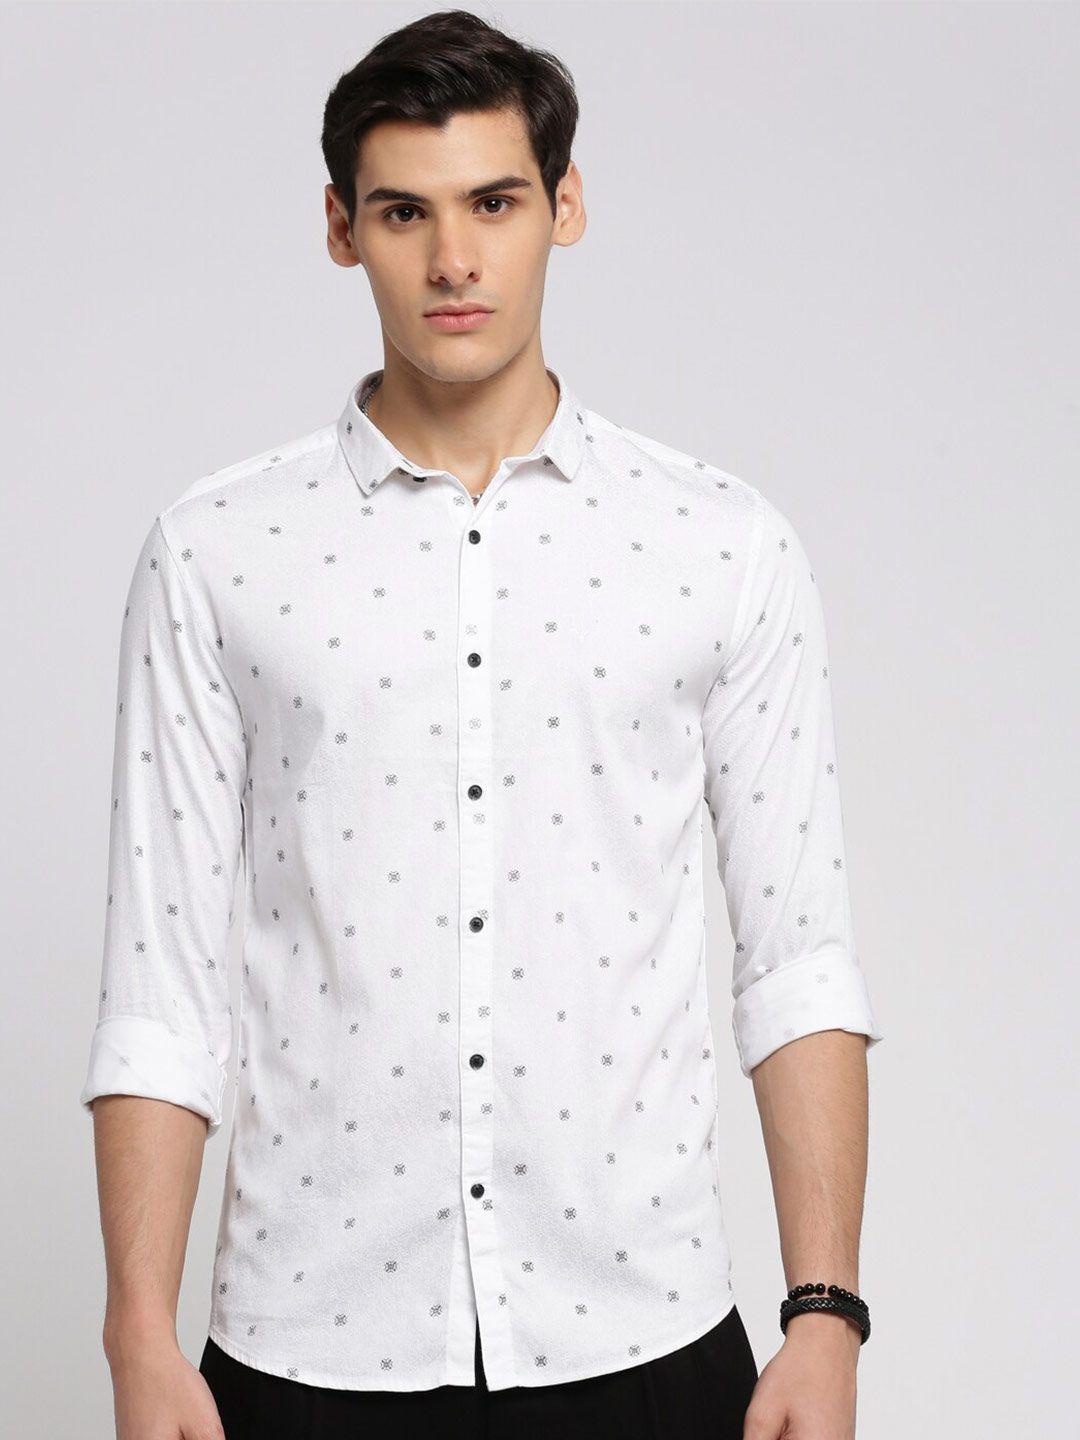 showoff-floral-printed-standard-slim-fit-cotton-casual-shirt